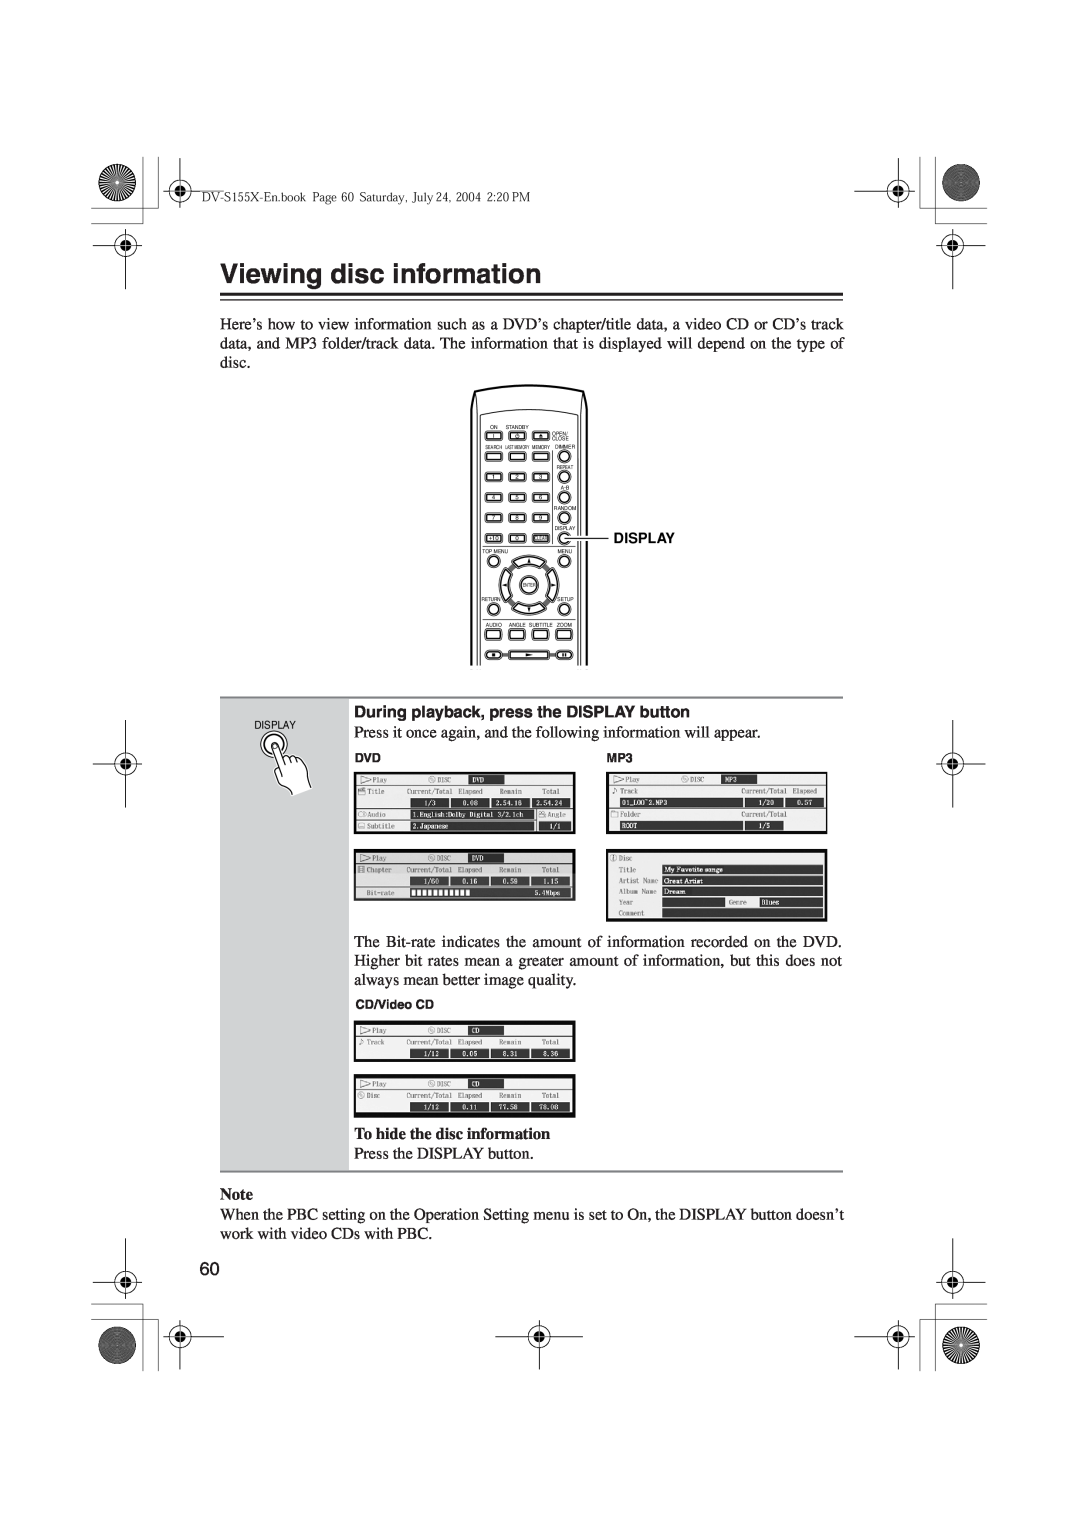 Onkyo DV-S155X, PR-155X Viewing disc information, During playback, press the DISPLAY button, To hide the disc information 